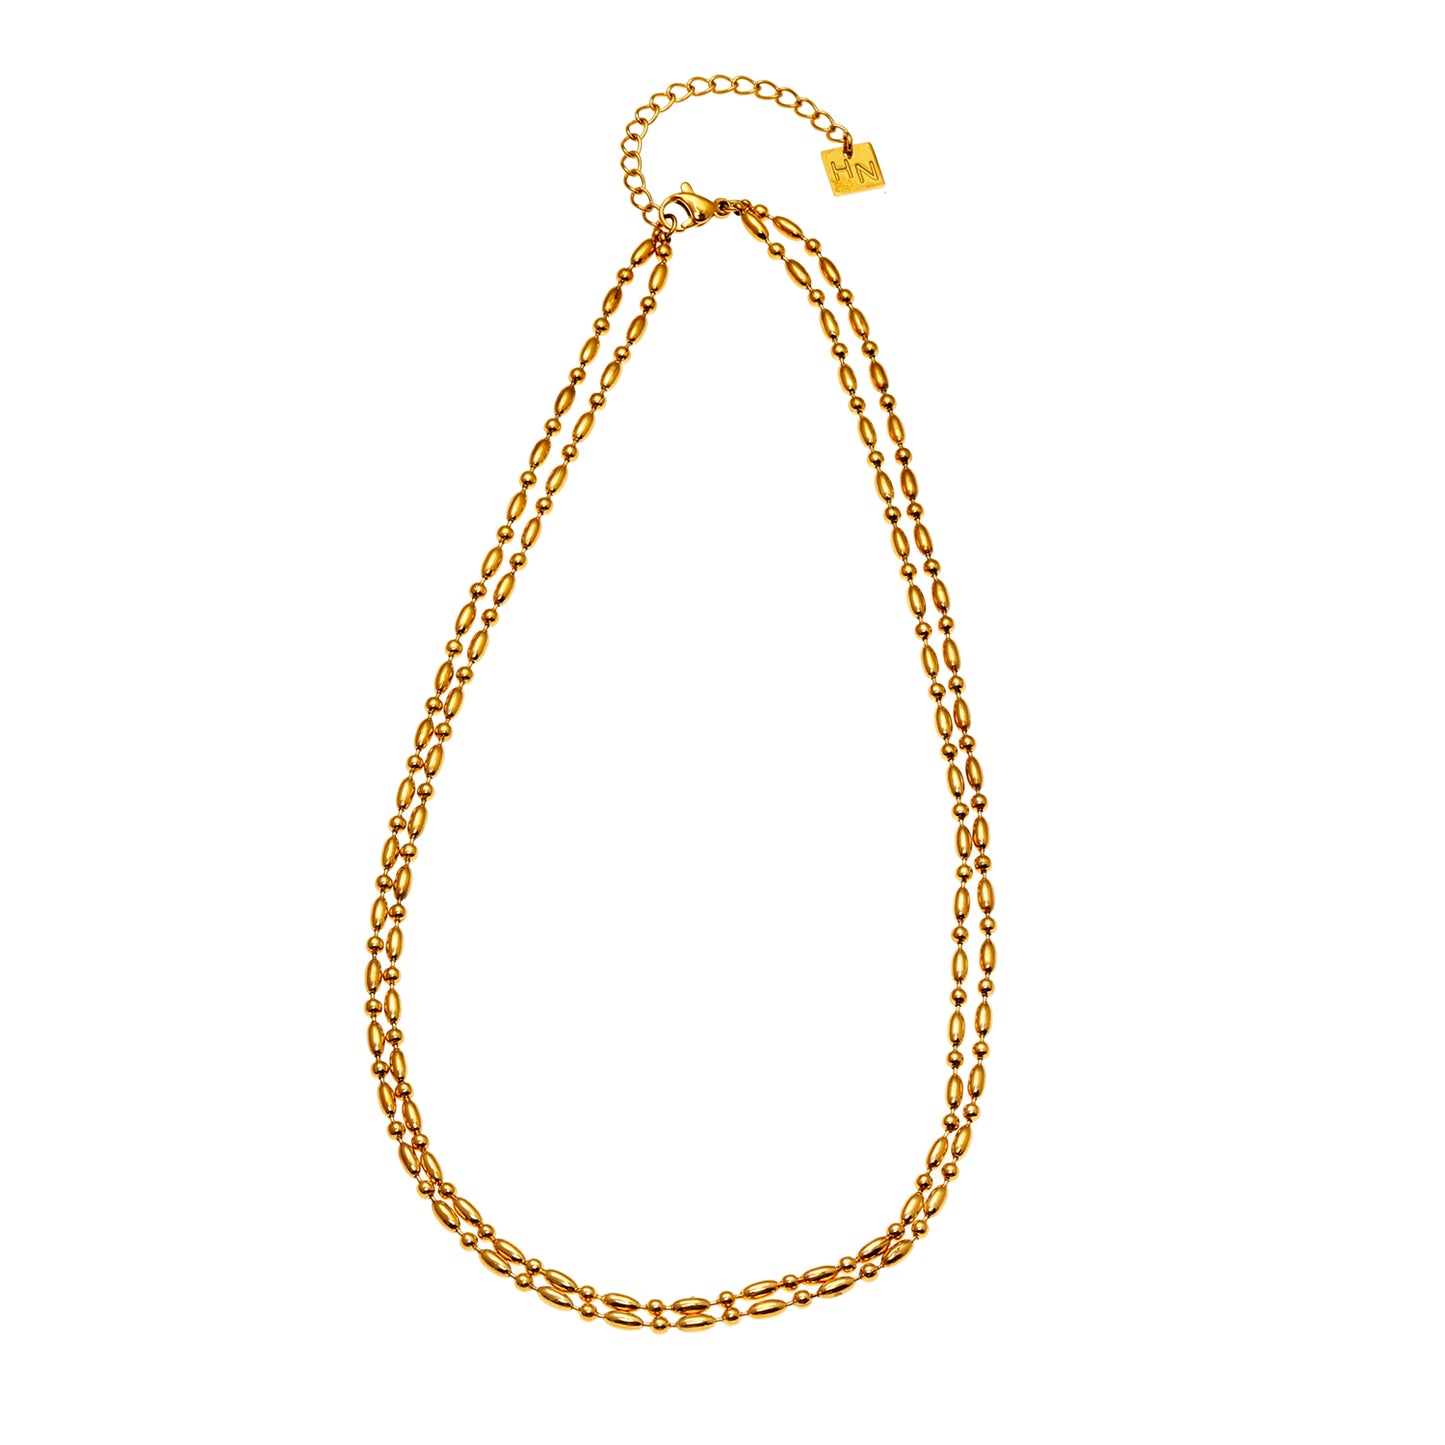 GUADIX: Double Layered Oval & Round Beaded Chain Necklace